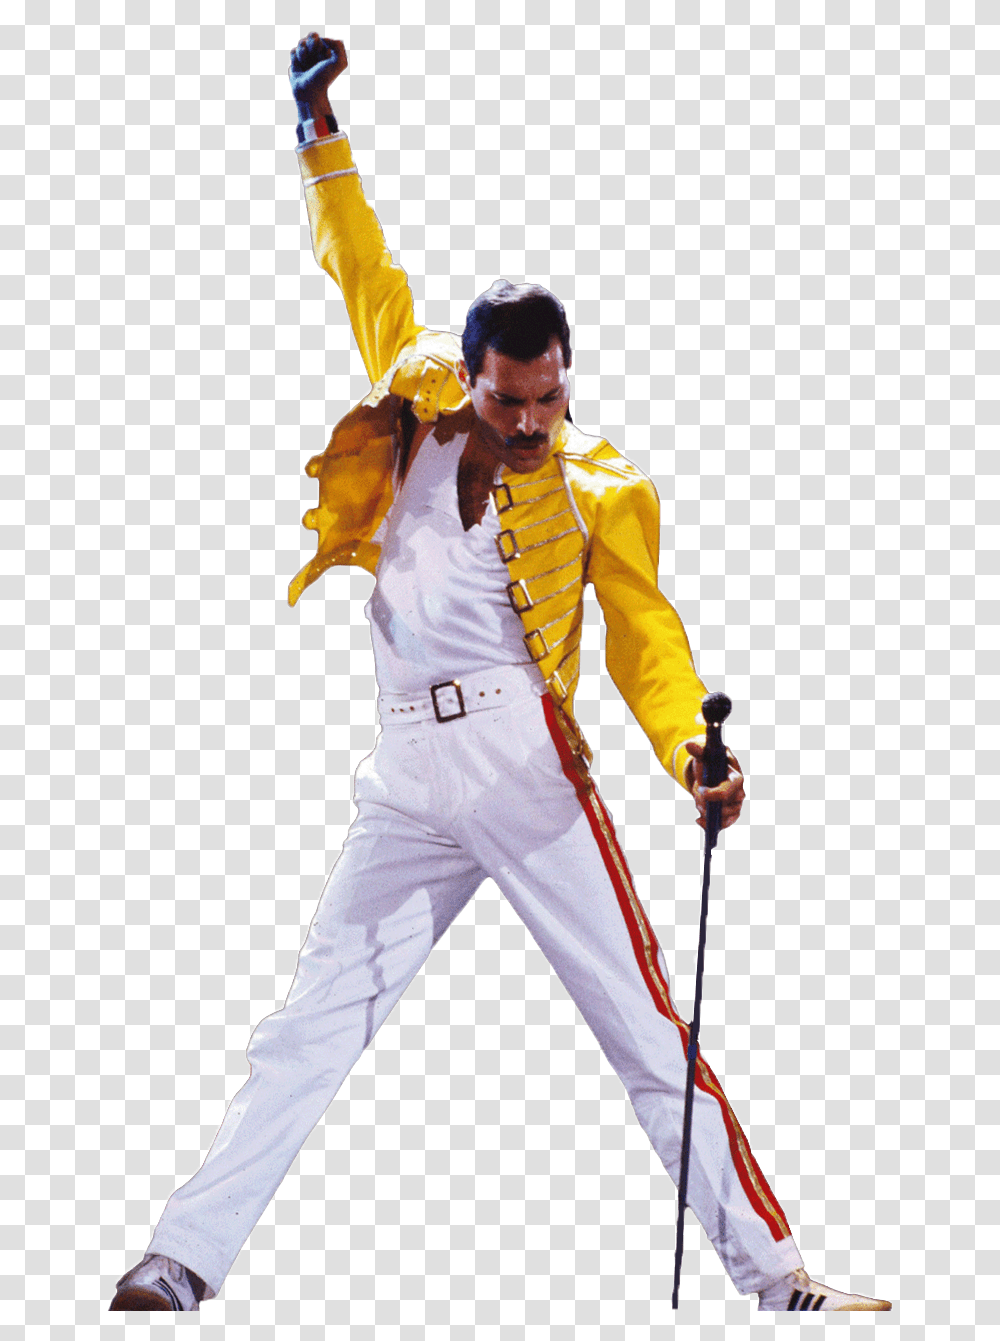 Download Freddie Mercury Pose Fredy Mercury, Person, Performer, Clothing, Dance Pose Transparent Png